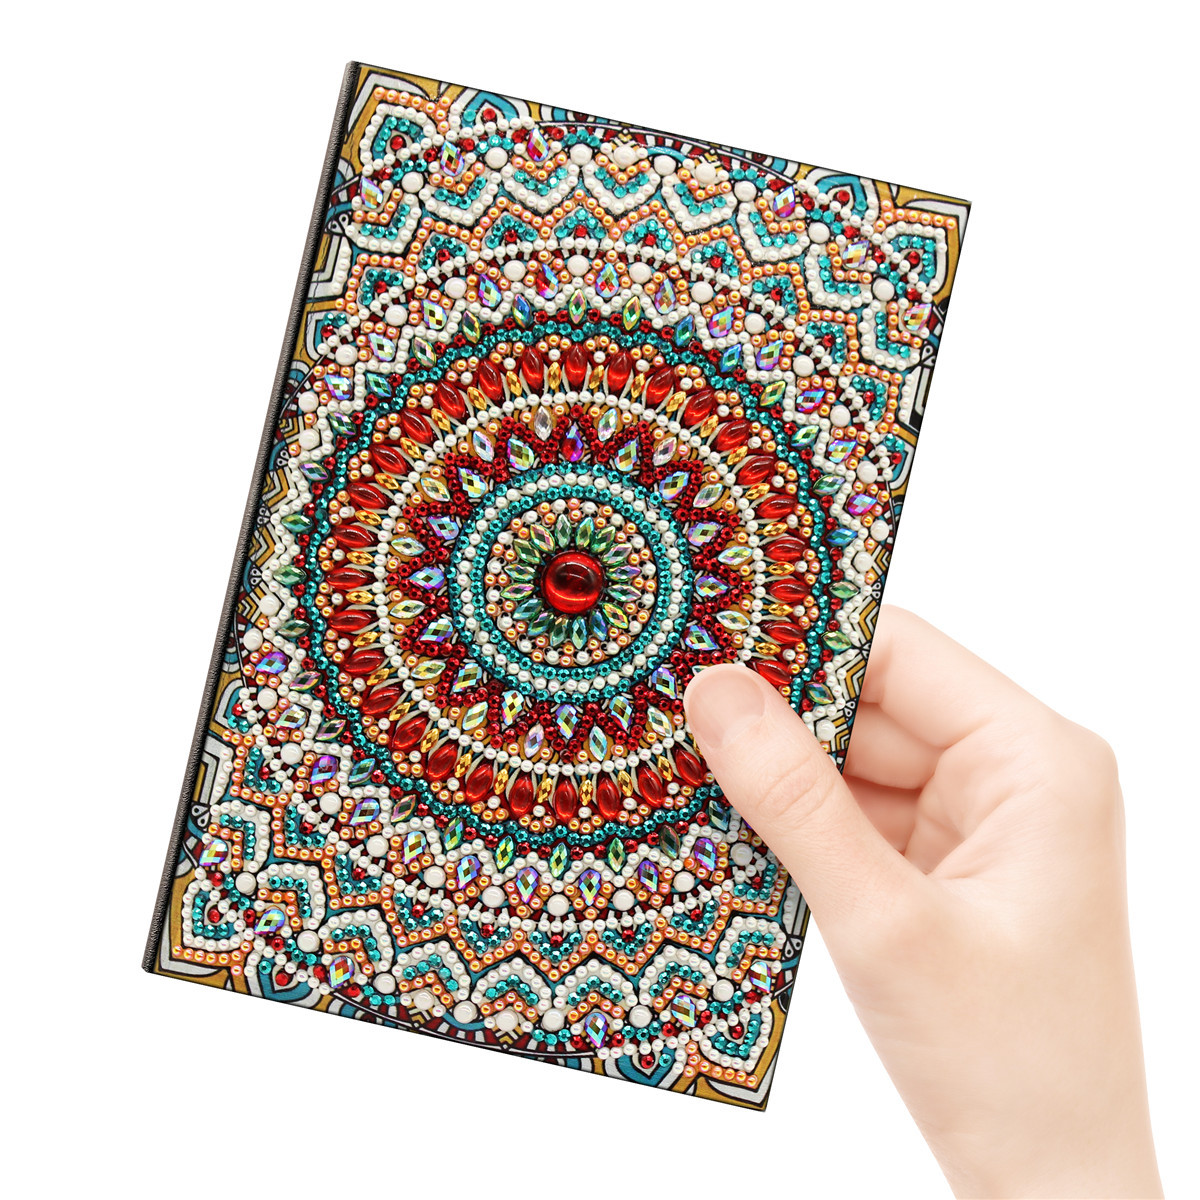 DIY-Diamond-Painting-Special-Shape-Diary-Book-Diamond-Decorations-A5-Notebook-Embroidery-kits-1561135-10